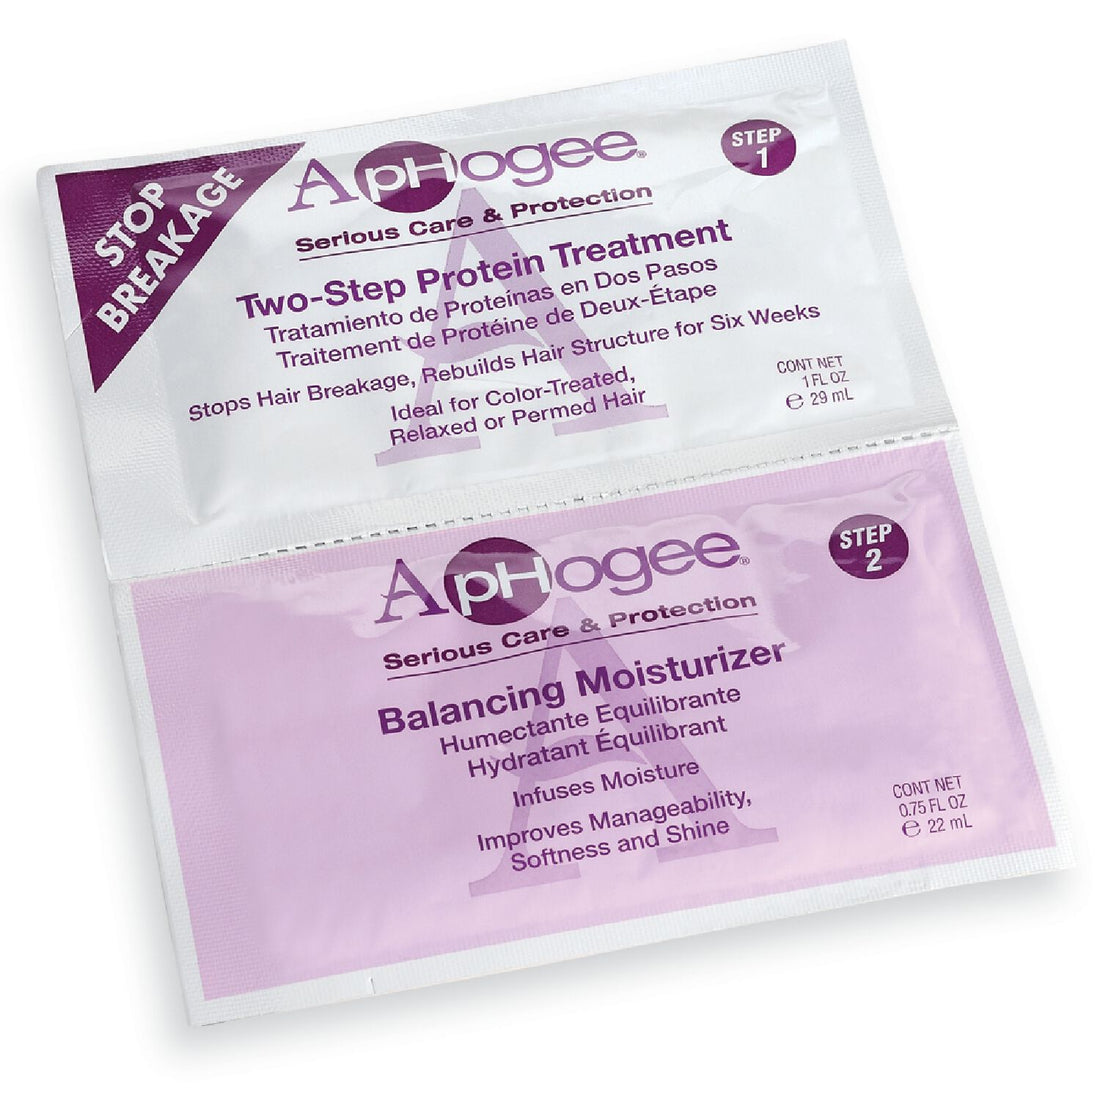 APHOGEE 2-STEP PROTEIN TREATMENT - SINGLE TWIN PACKETTES.